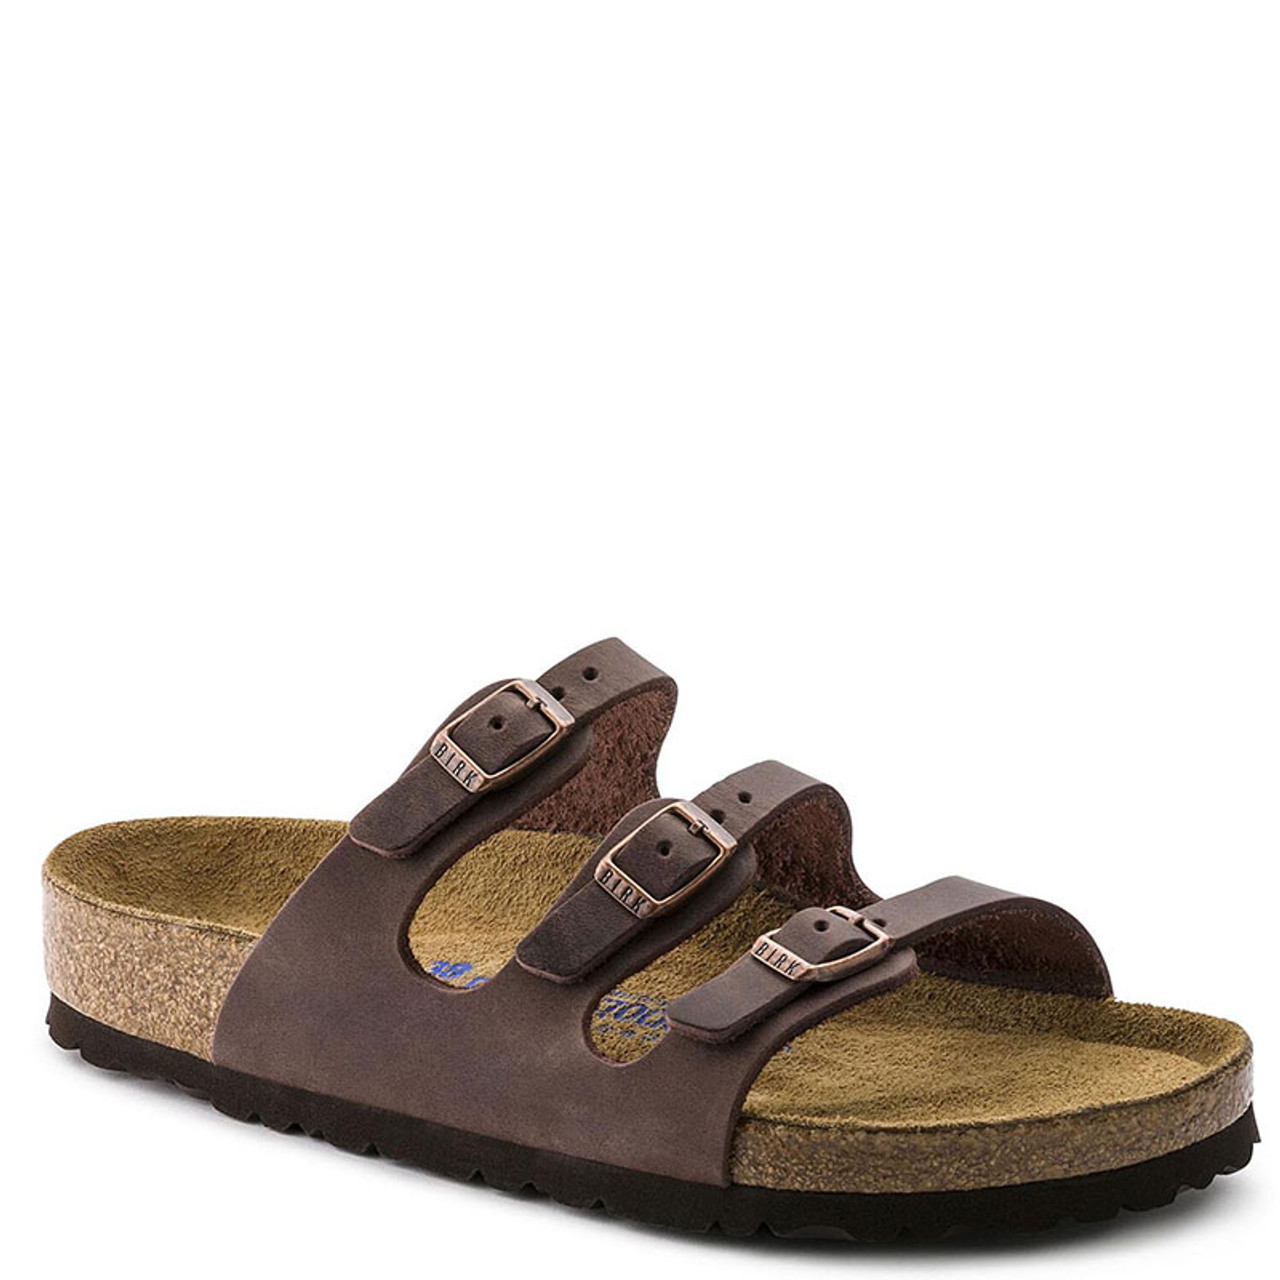 53901 FLORIDA HABANA SOFT FOOTBED Oiled Leather Sandals - Family Footwear Center